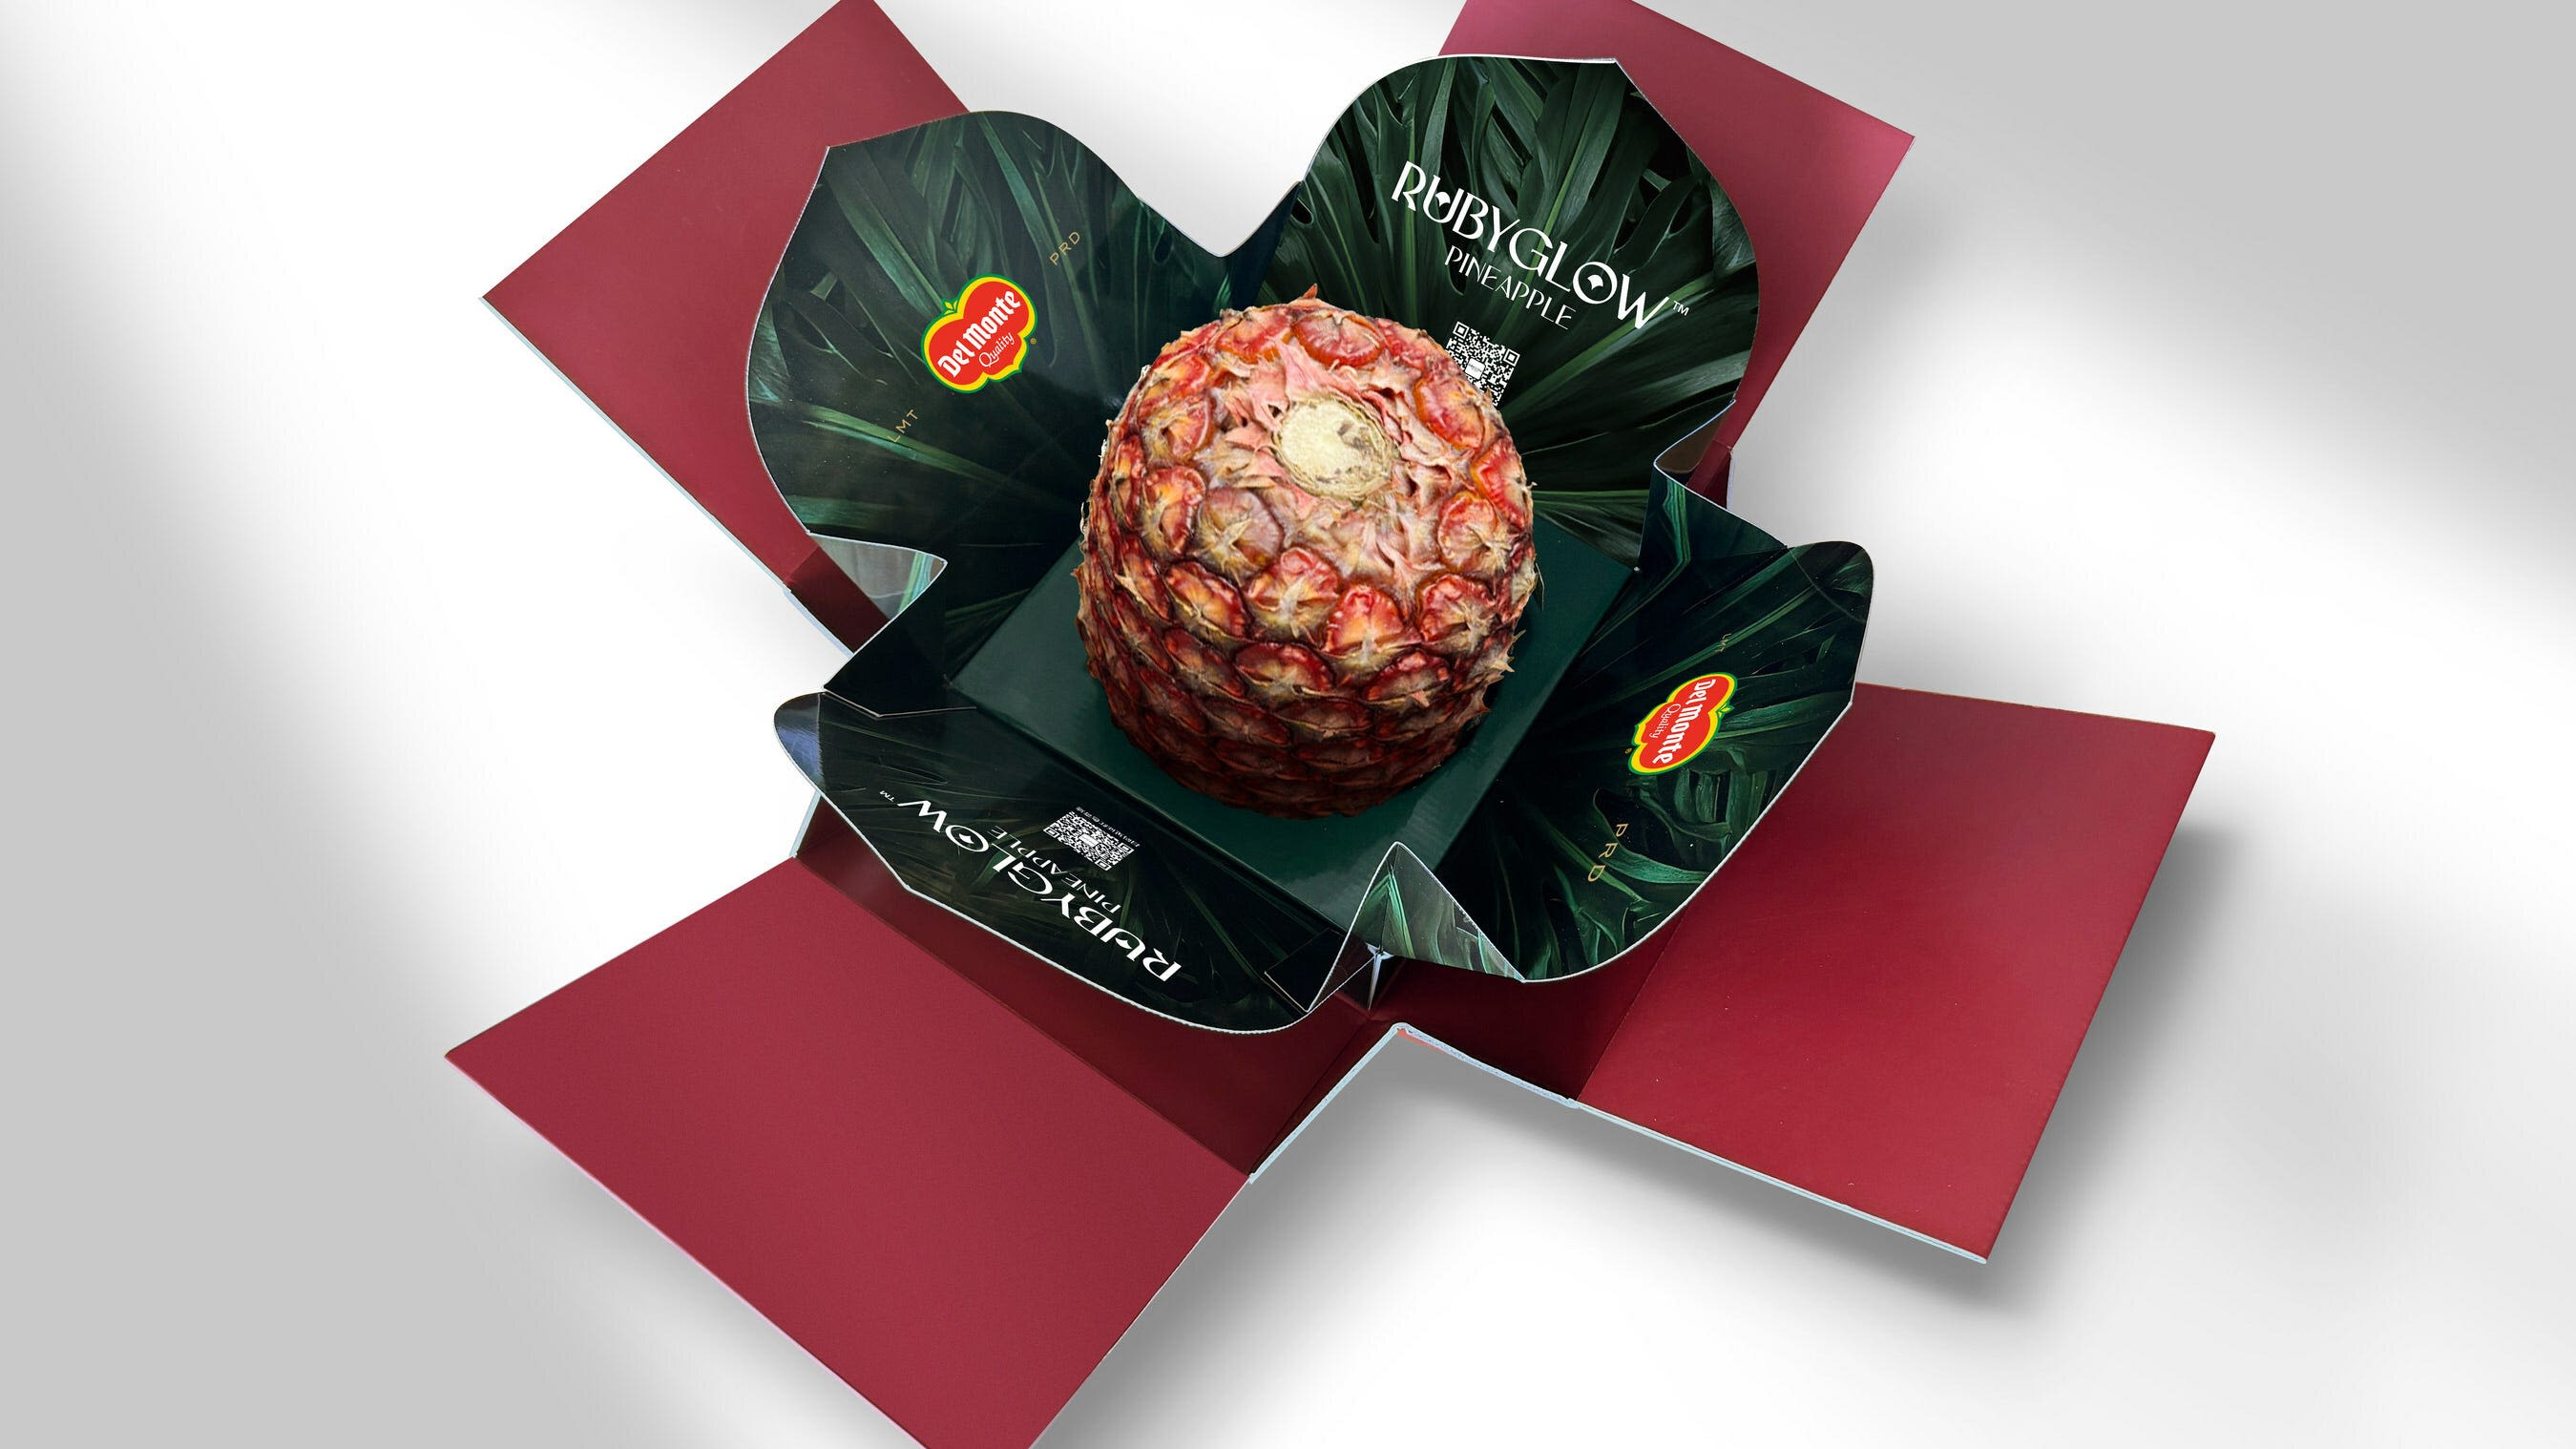 Rare $400 Rubyglow pineapple was introduced to the US this month. It already sold out.